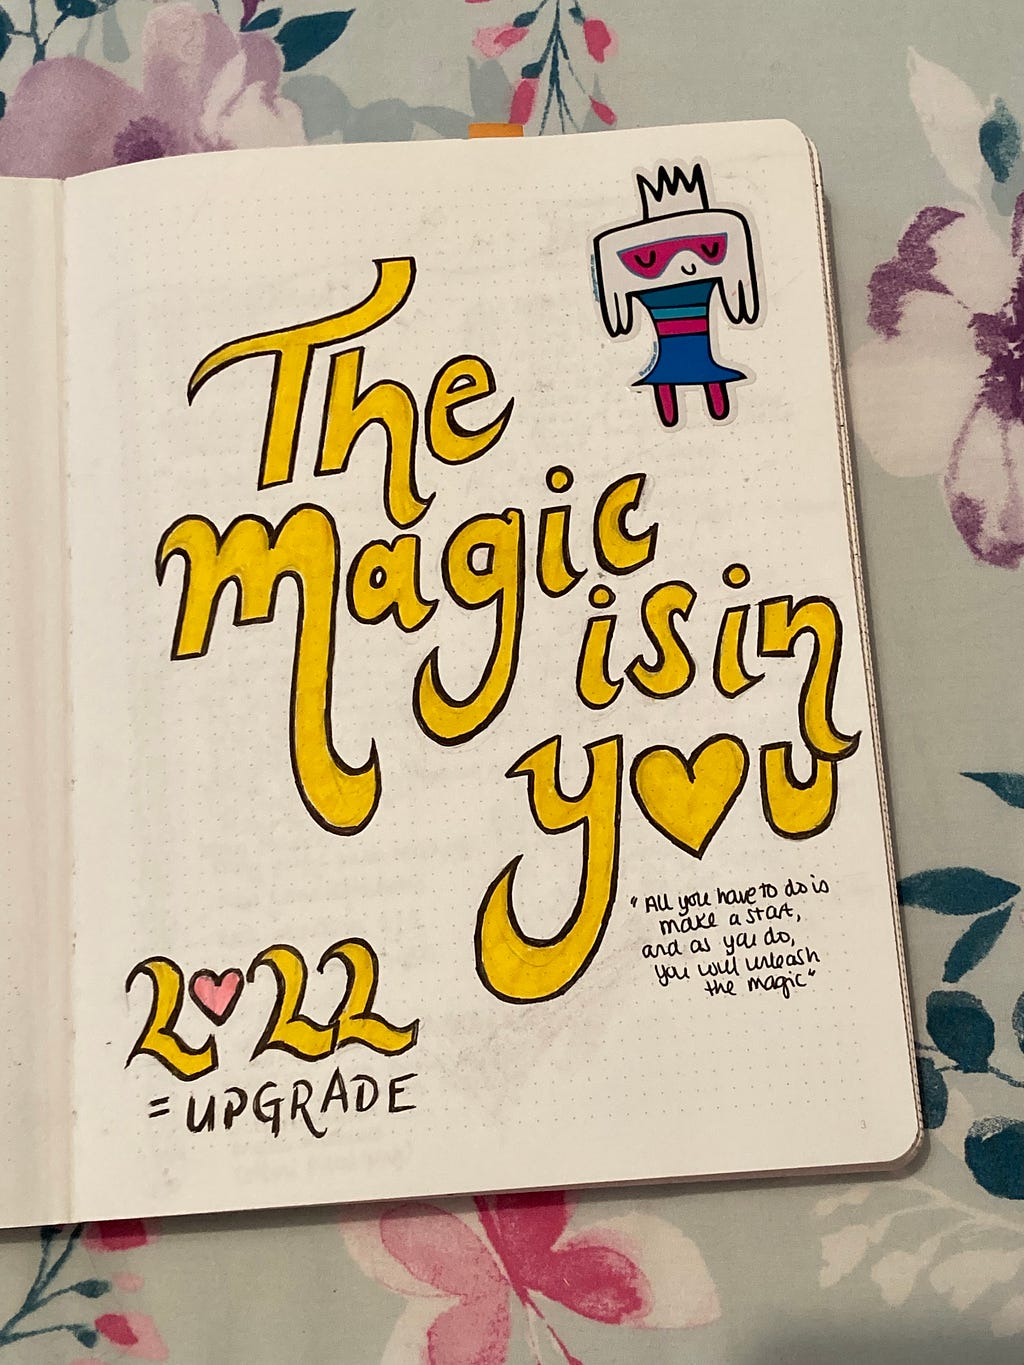 The opening page of my 2022 journal which reads ‘The magic is in you’ in large font, followed by a quote ‘All you have to do is make a start, and as you do, you will unleash the magic’. At the bottom of the page it reads ‘2022 = upgrade’